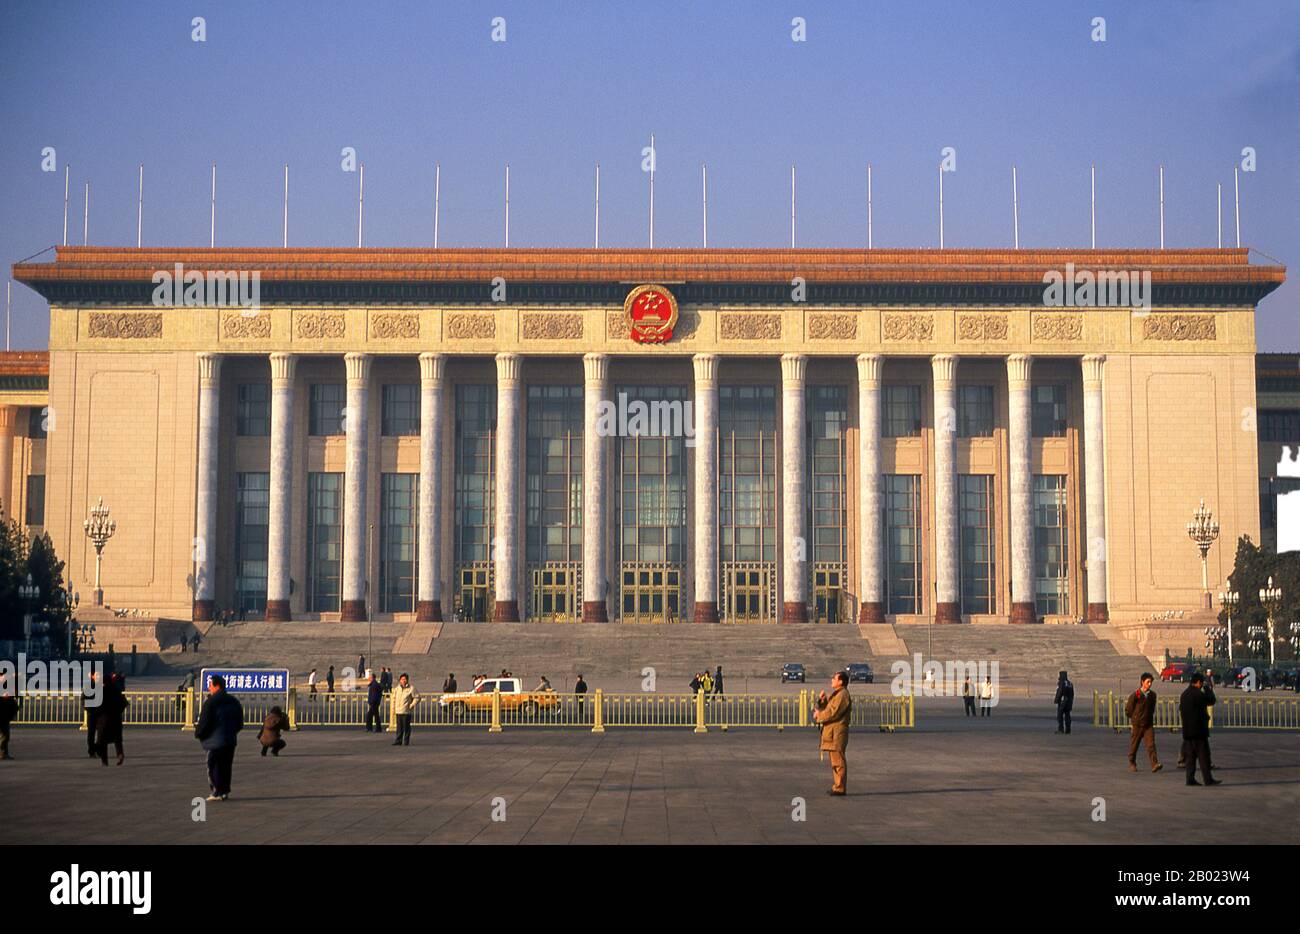 The Great Hall of the People, on the western edge of Tiananmen Square, was completed in 1959 and is the seat of the Chinese legislature. It functions as the meeting place of the National People's Congress, the Chinese parliament.  Tiananmen Square is the third largest public square in the world, covering 100 acres. It was used as a public gathering place during both the Ming and Qing dynasties.  The square is the political heart of modern China. Beijing university students came here to protest Japanese demands on China in 1919, and it was from the rostrum of the Gate of Heavenly Peace that Cha Stock Photo